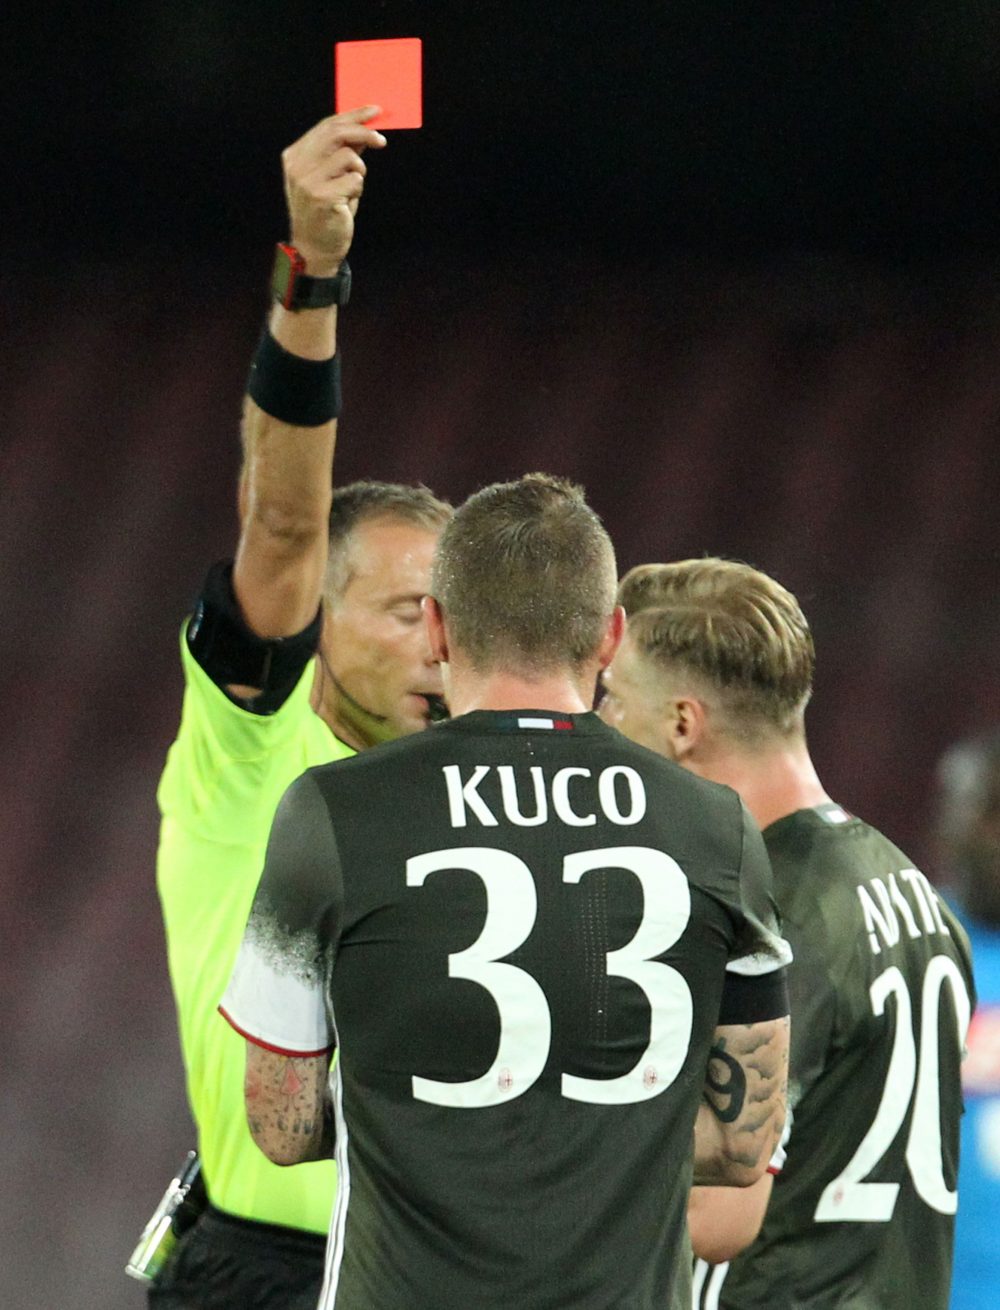 Milan's Slovakian midfielder Juraj Kucka receives a red card during the Italian Serie A football match SSC Napoli versus AC Milan on August 27, 2016 at the San Paolo stadium in Naples. / AFP / CARLO HERMANN (Photo credit should read CARLO HERMANN/AFP/Getty Images)